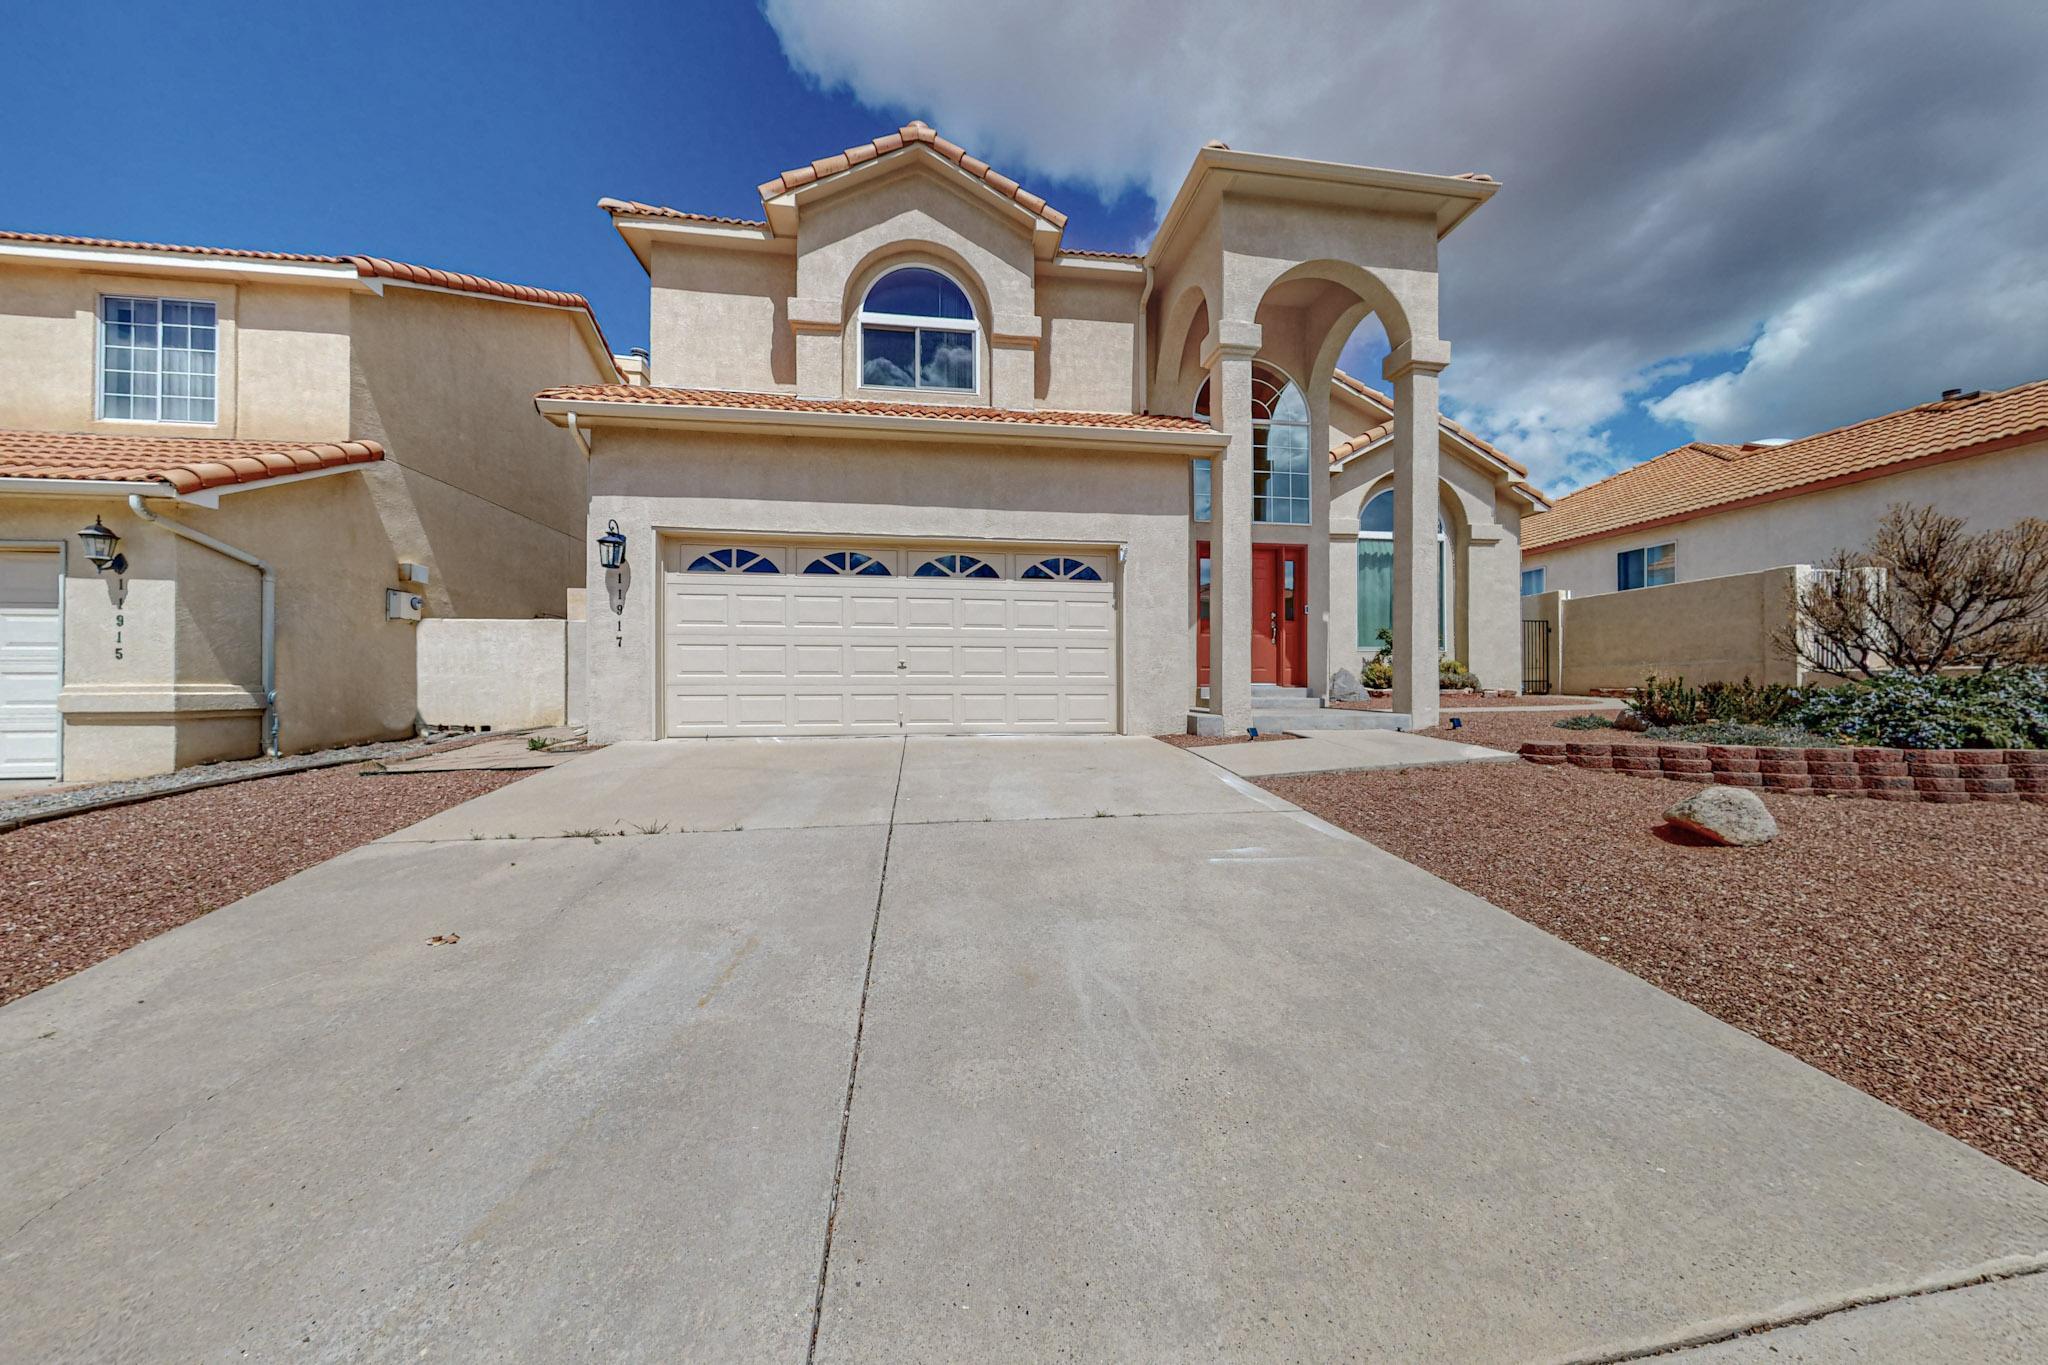 11917 Oryx Place NE, Albuquerque, New Mexico 87111, 3 Bedrooms Bedrooms, ,3 BathroomsBathrooms,Residential,For Sale,11917 Oryx Place NE,1060966